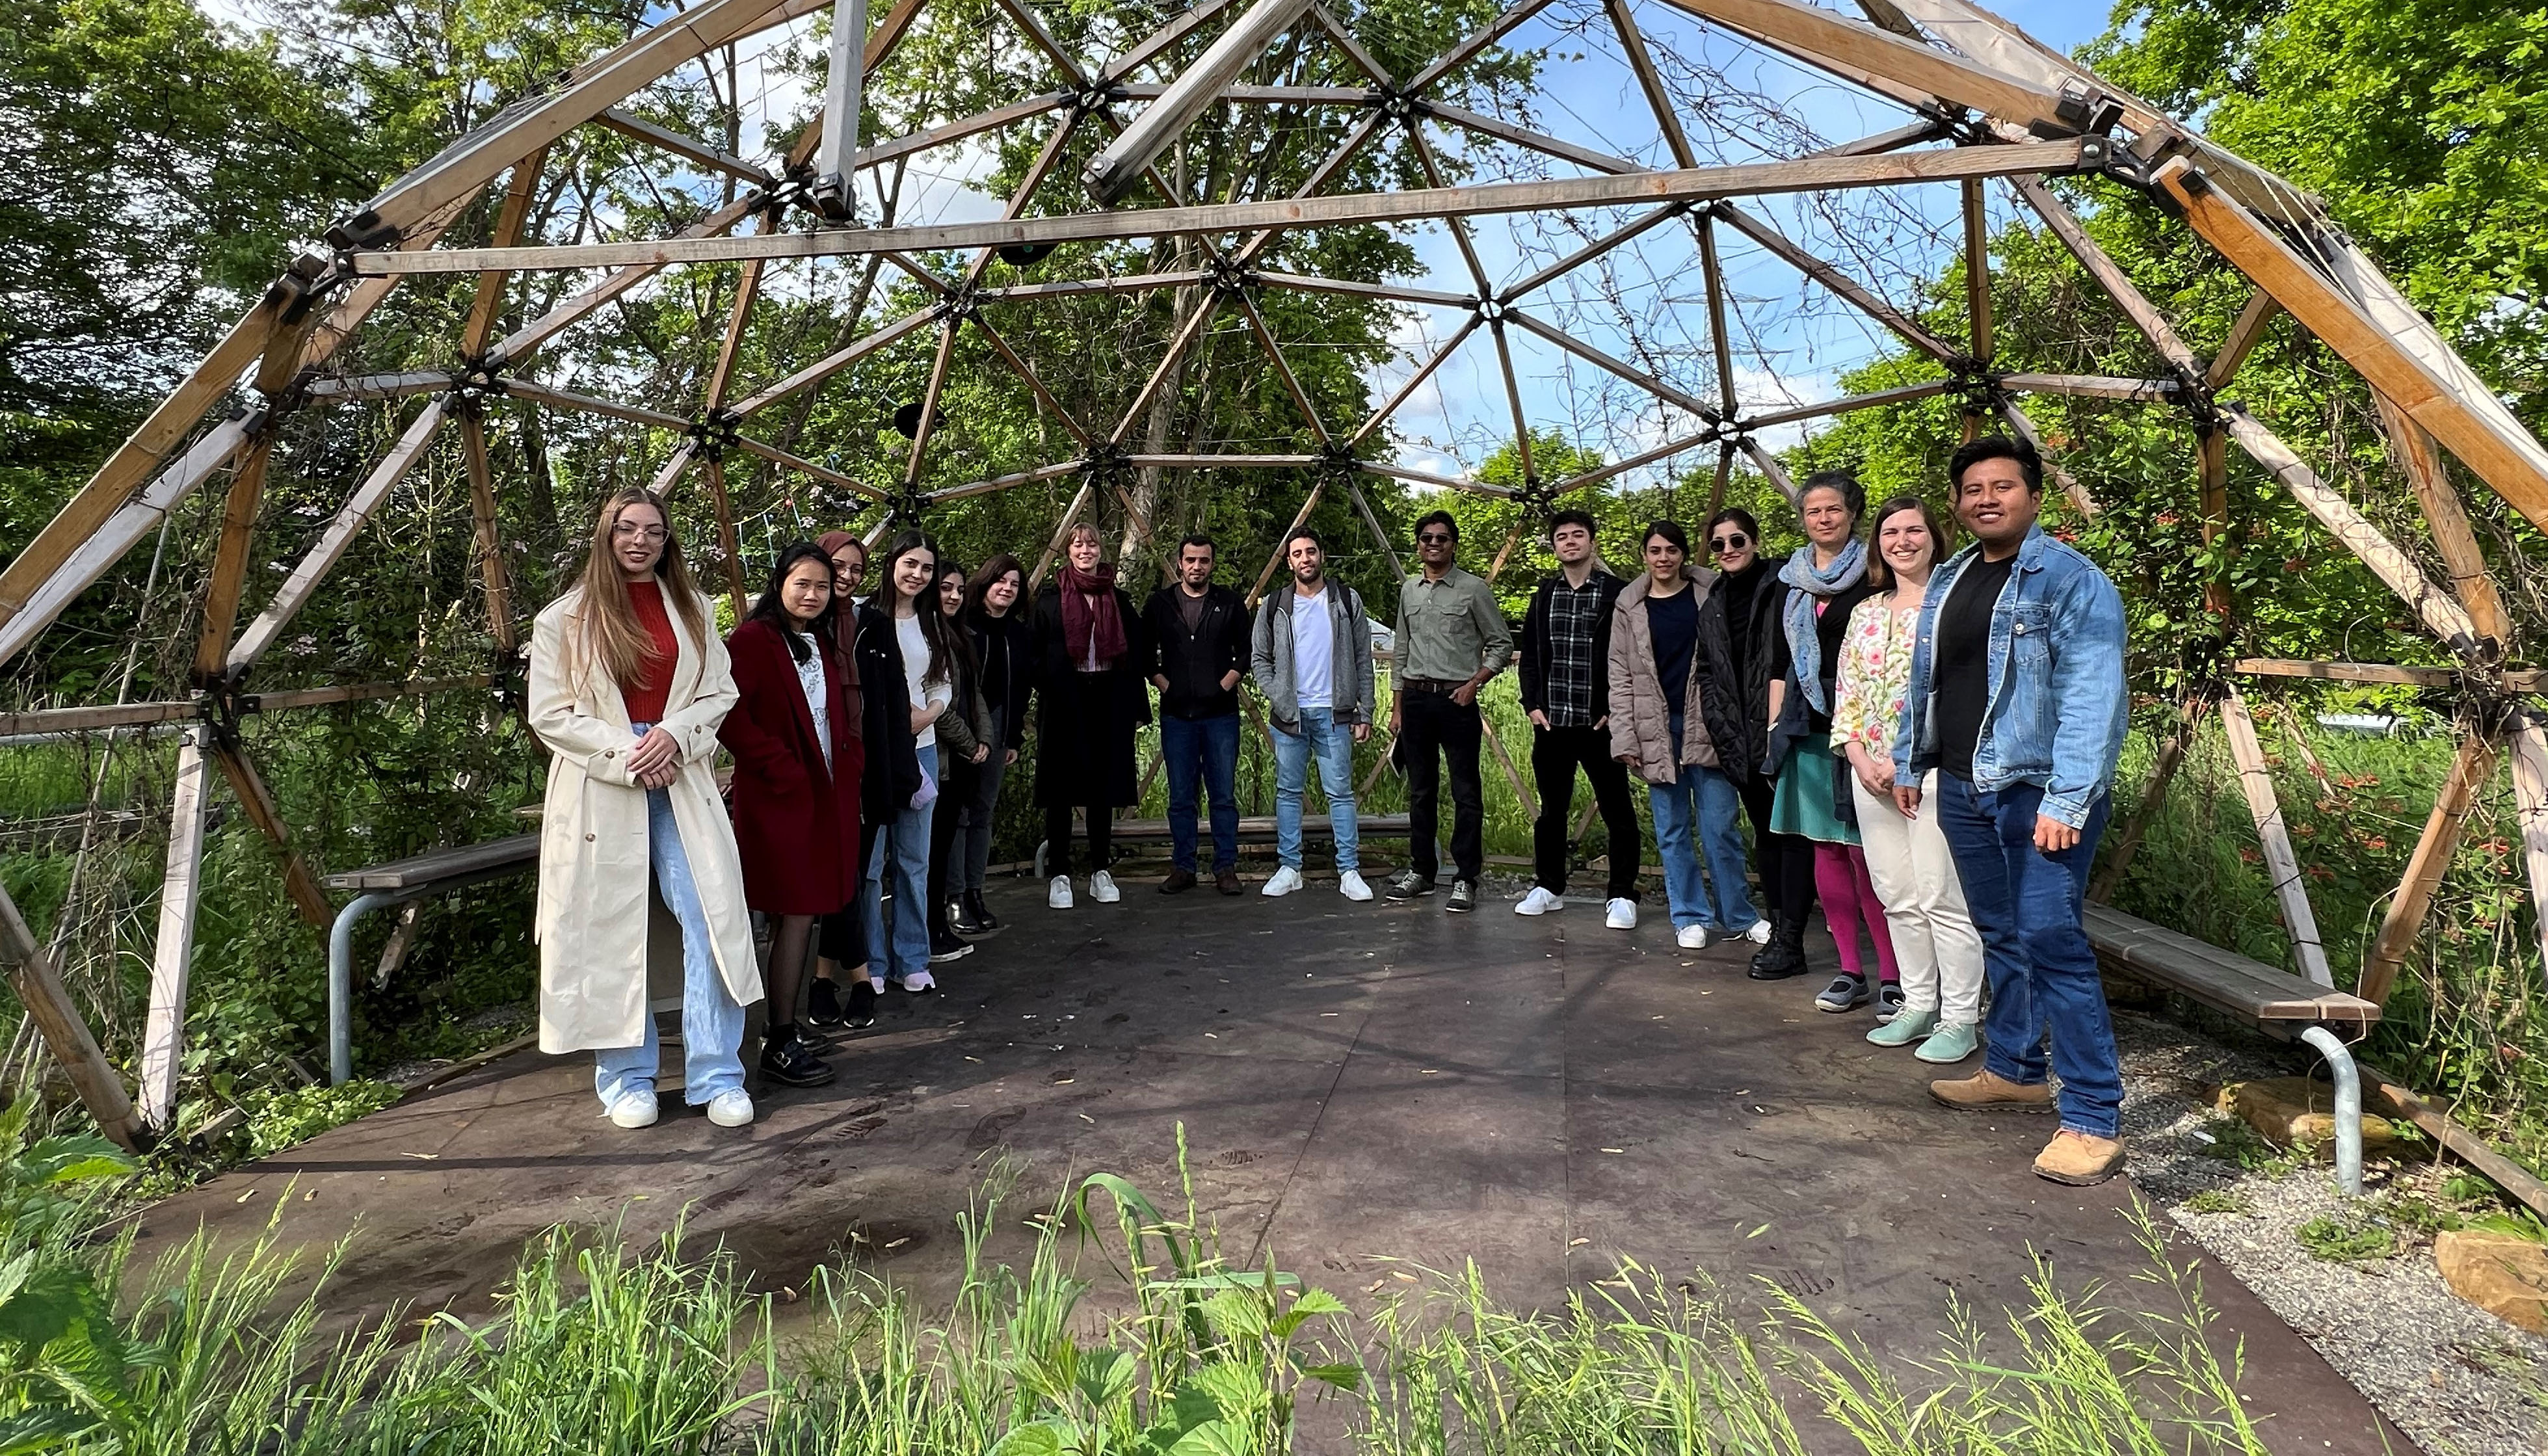 Group of students around a slabbed square, square on a meadow, covered by a wooden dome, trees in the background.